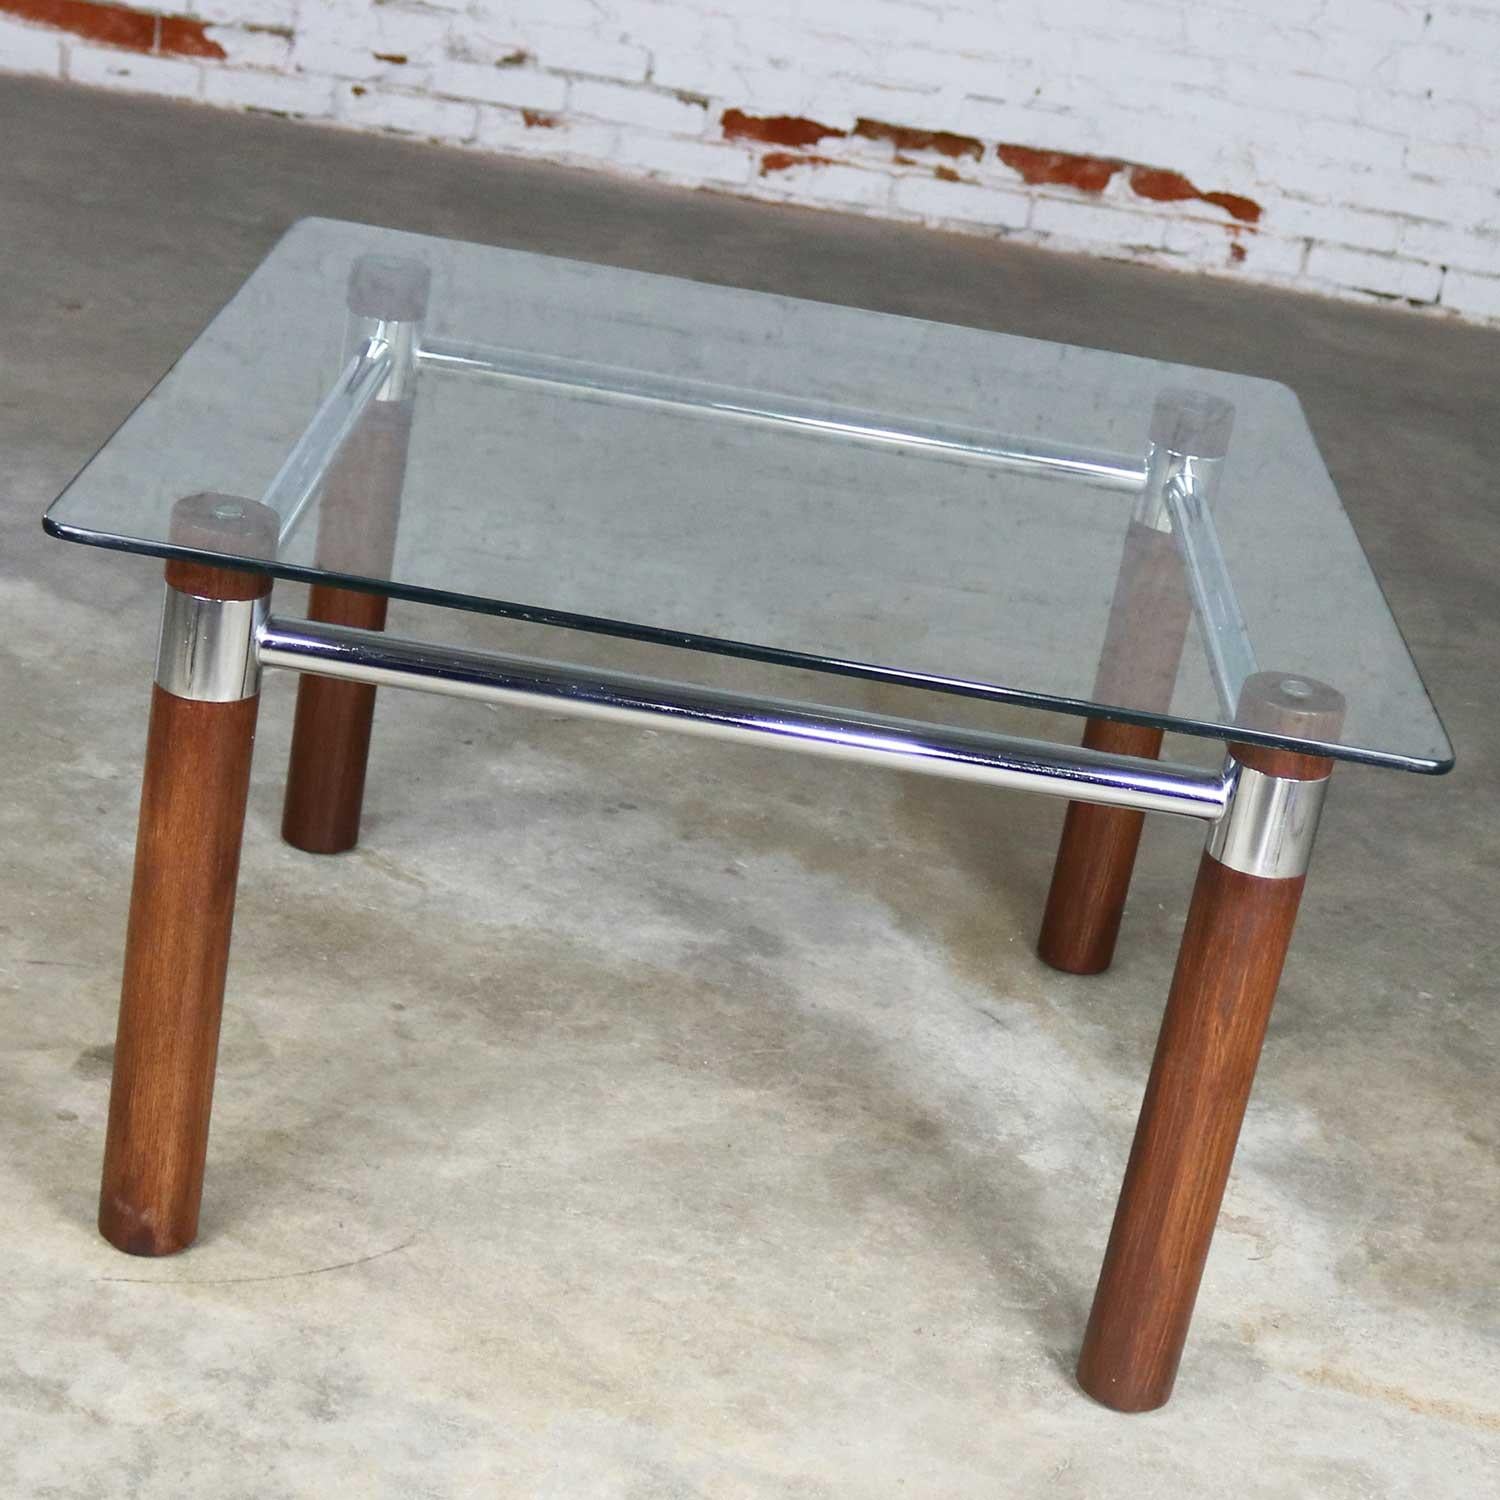 Handsome Mid-Century Modern to modern style square end table comprised of cylindrical oak legs with chrome stretchers and a glass top. Beautiful condition, keeping in mind that this is vintage and not new so will have signs of use and wear. There is